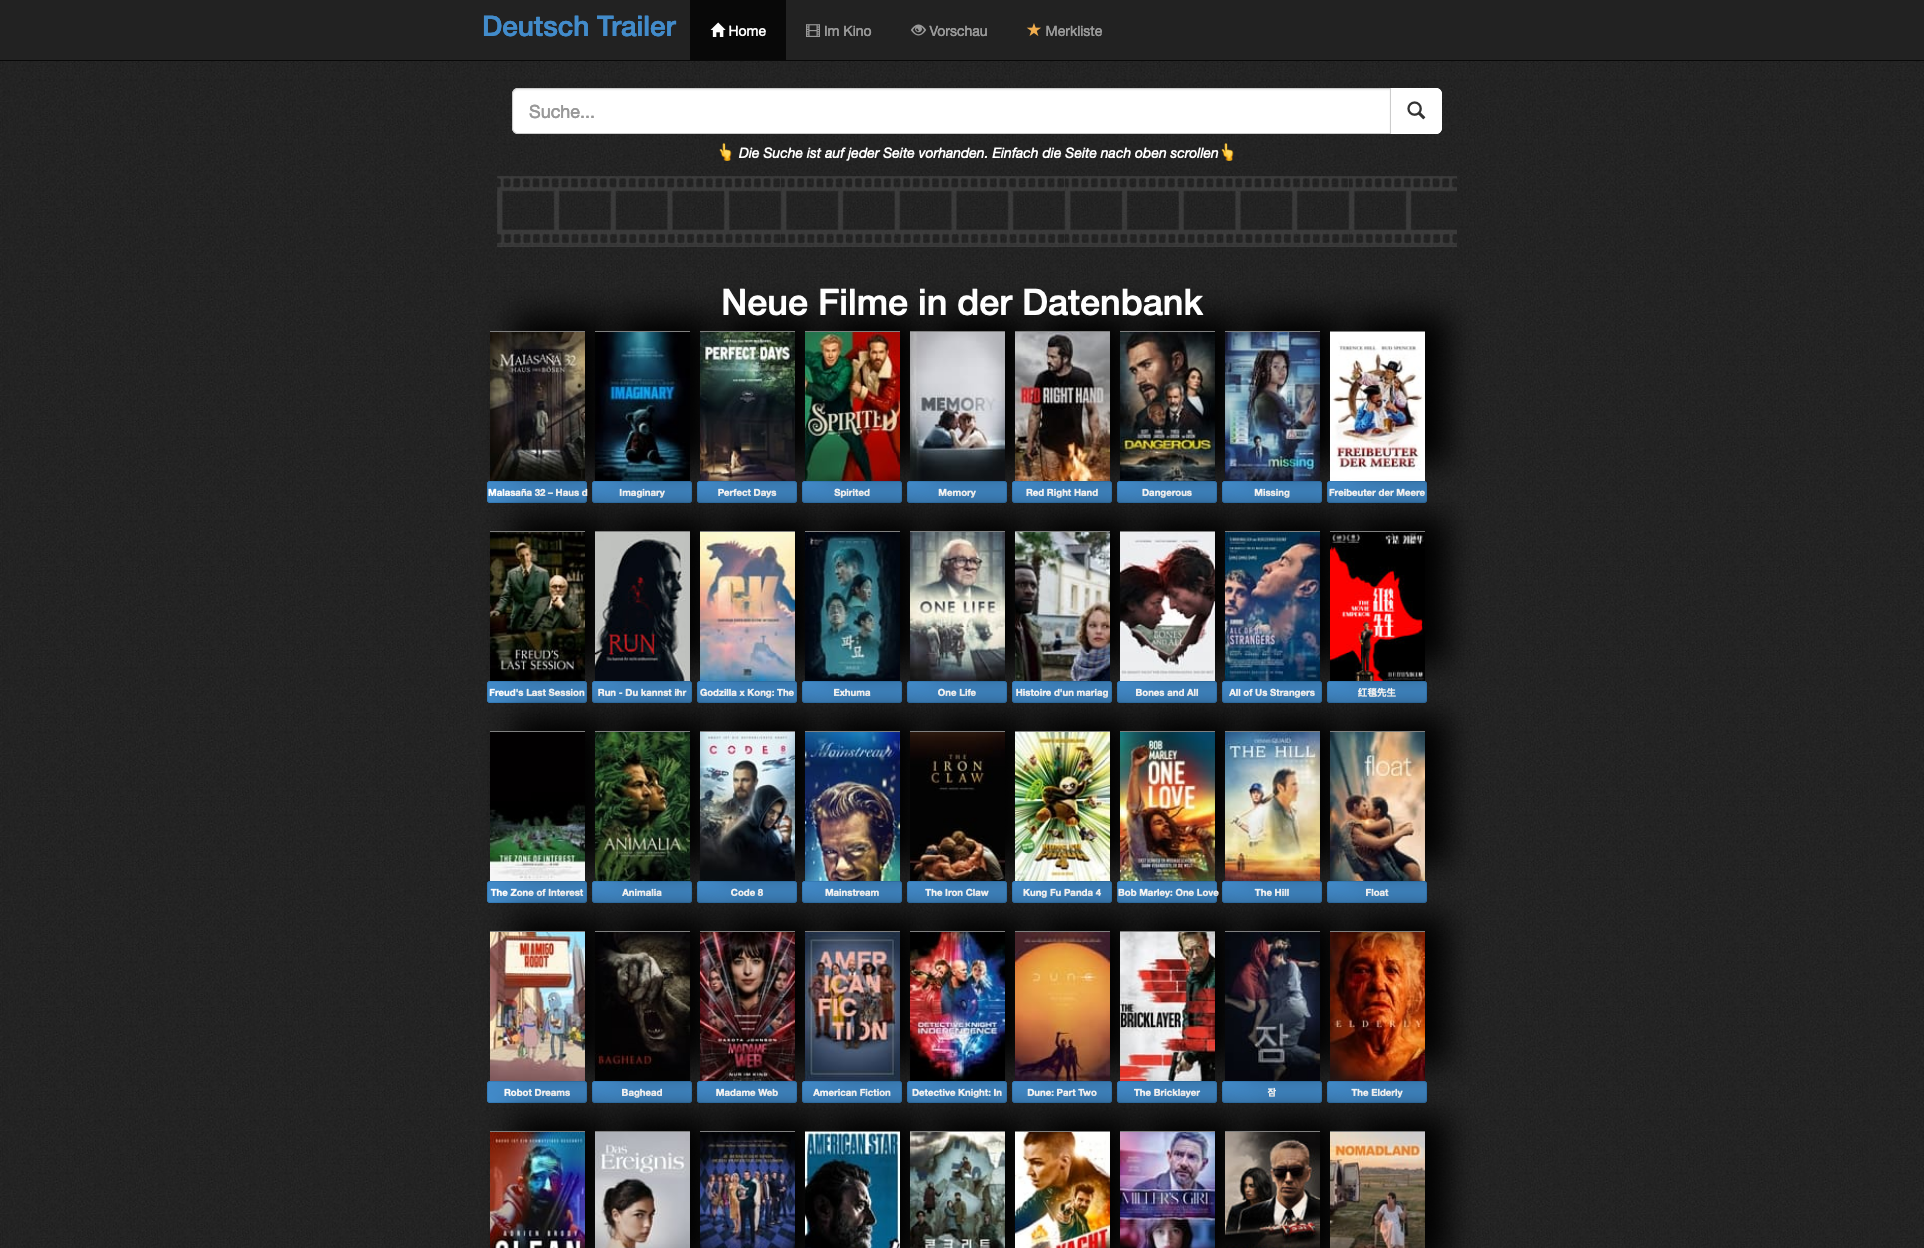 Homepage Image of Movie Page with Trailers